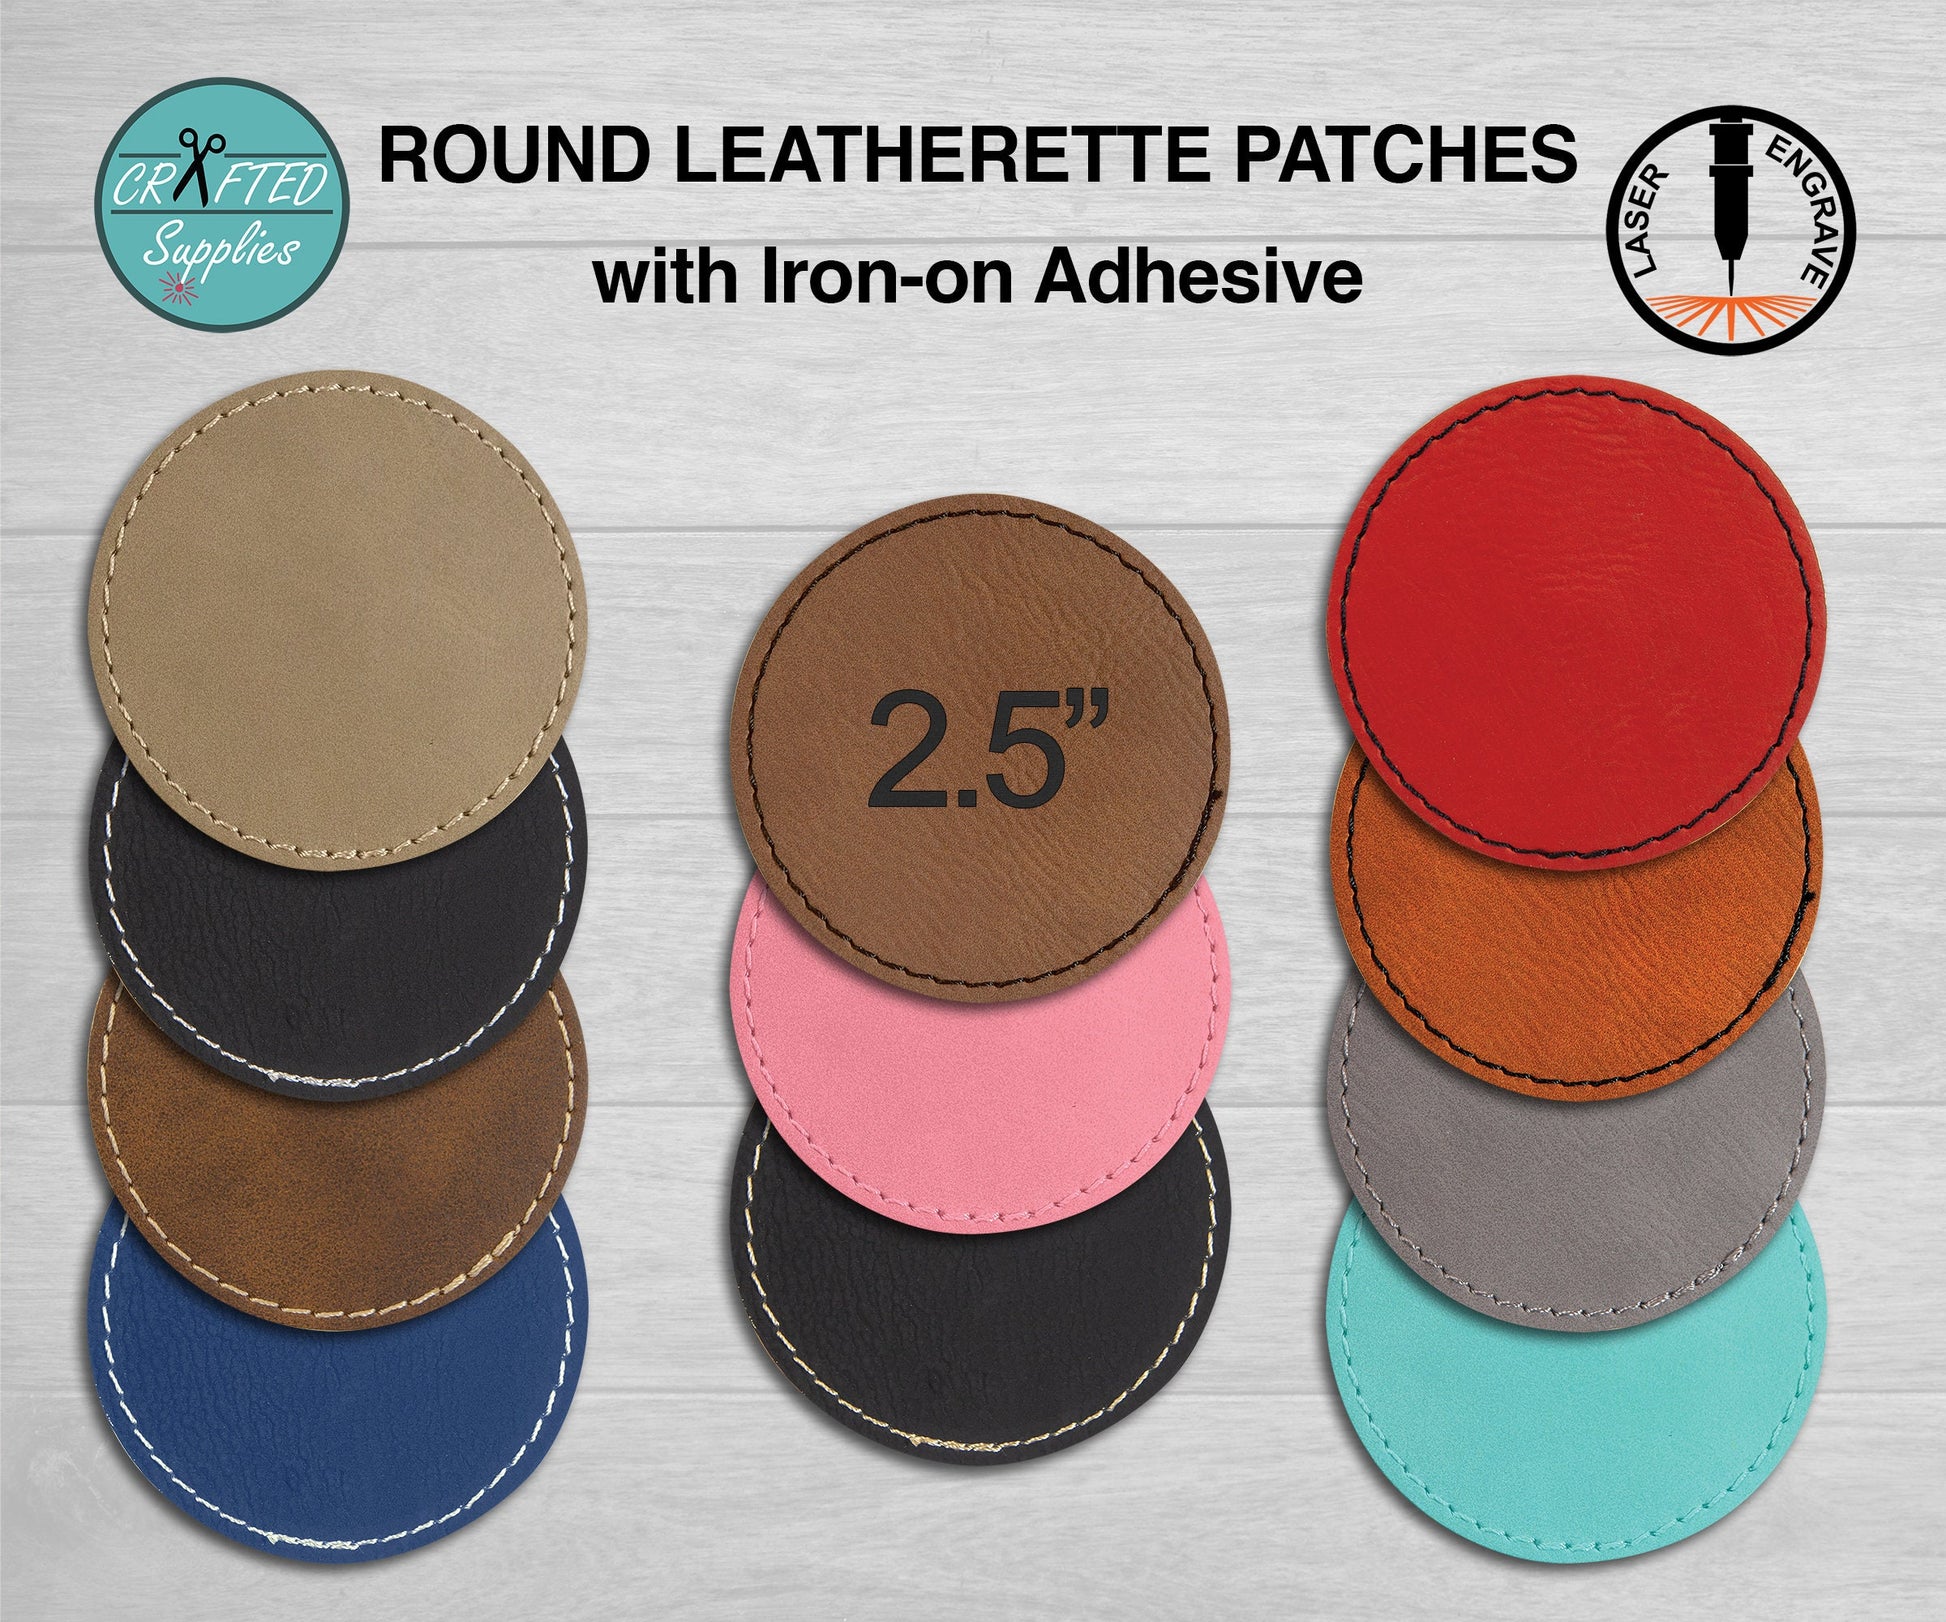 Round Leatherette Patches Adhesive with Stitching 3 1/2 X 2